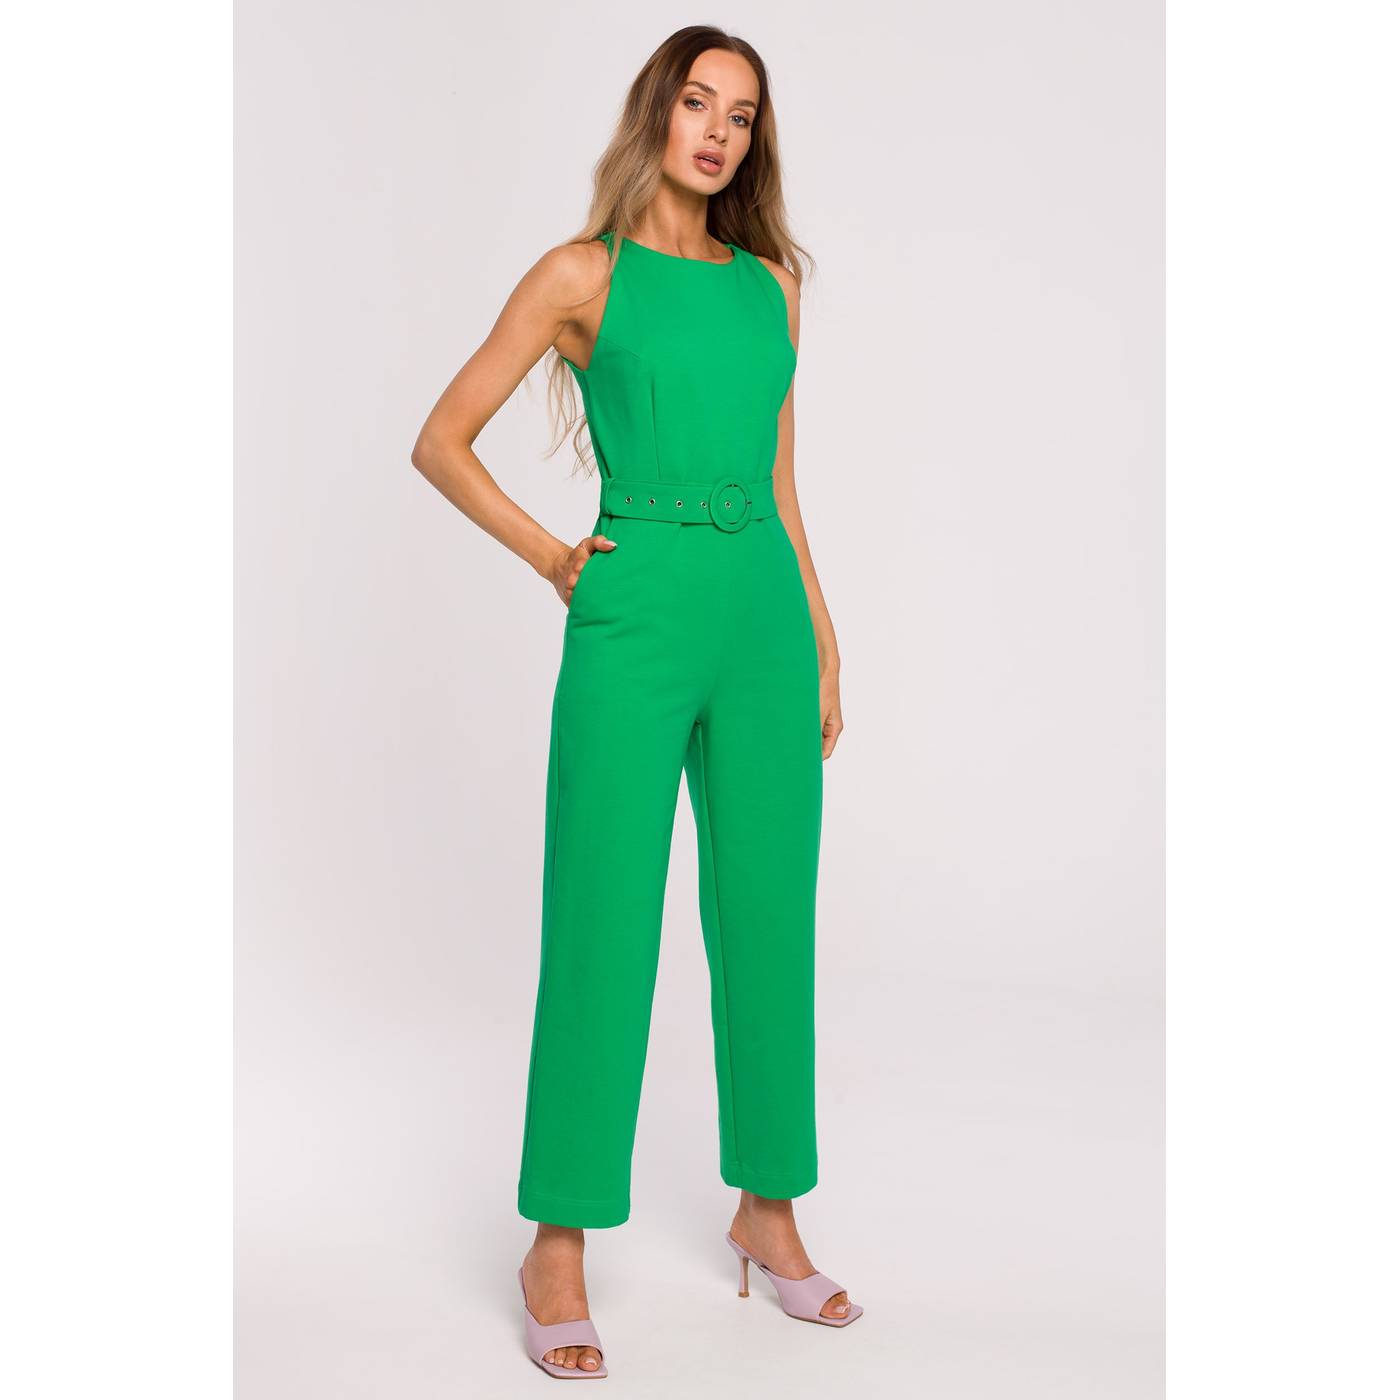 Made Of Emotion Woman's Jumpsuit M679